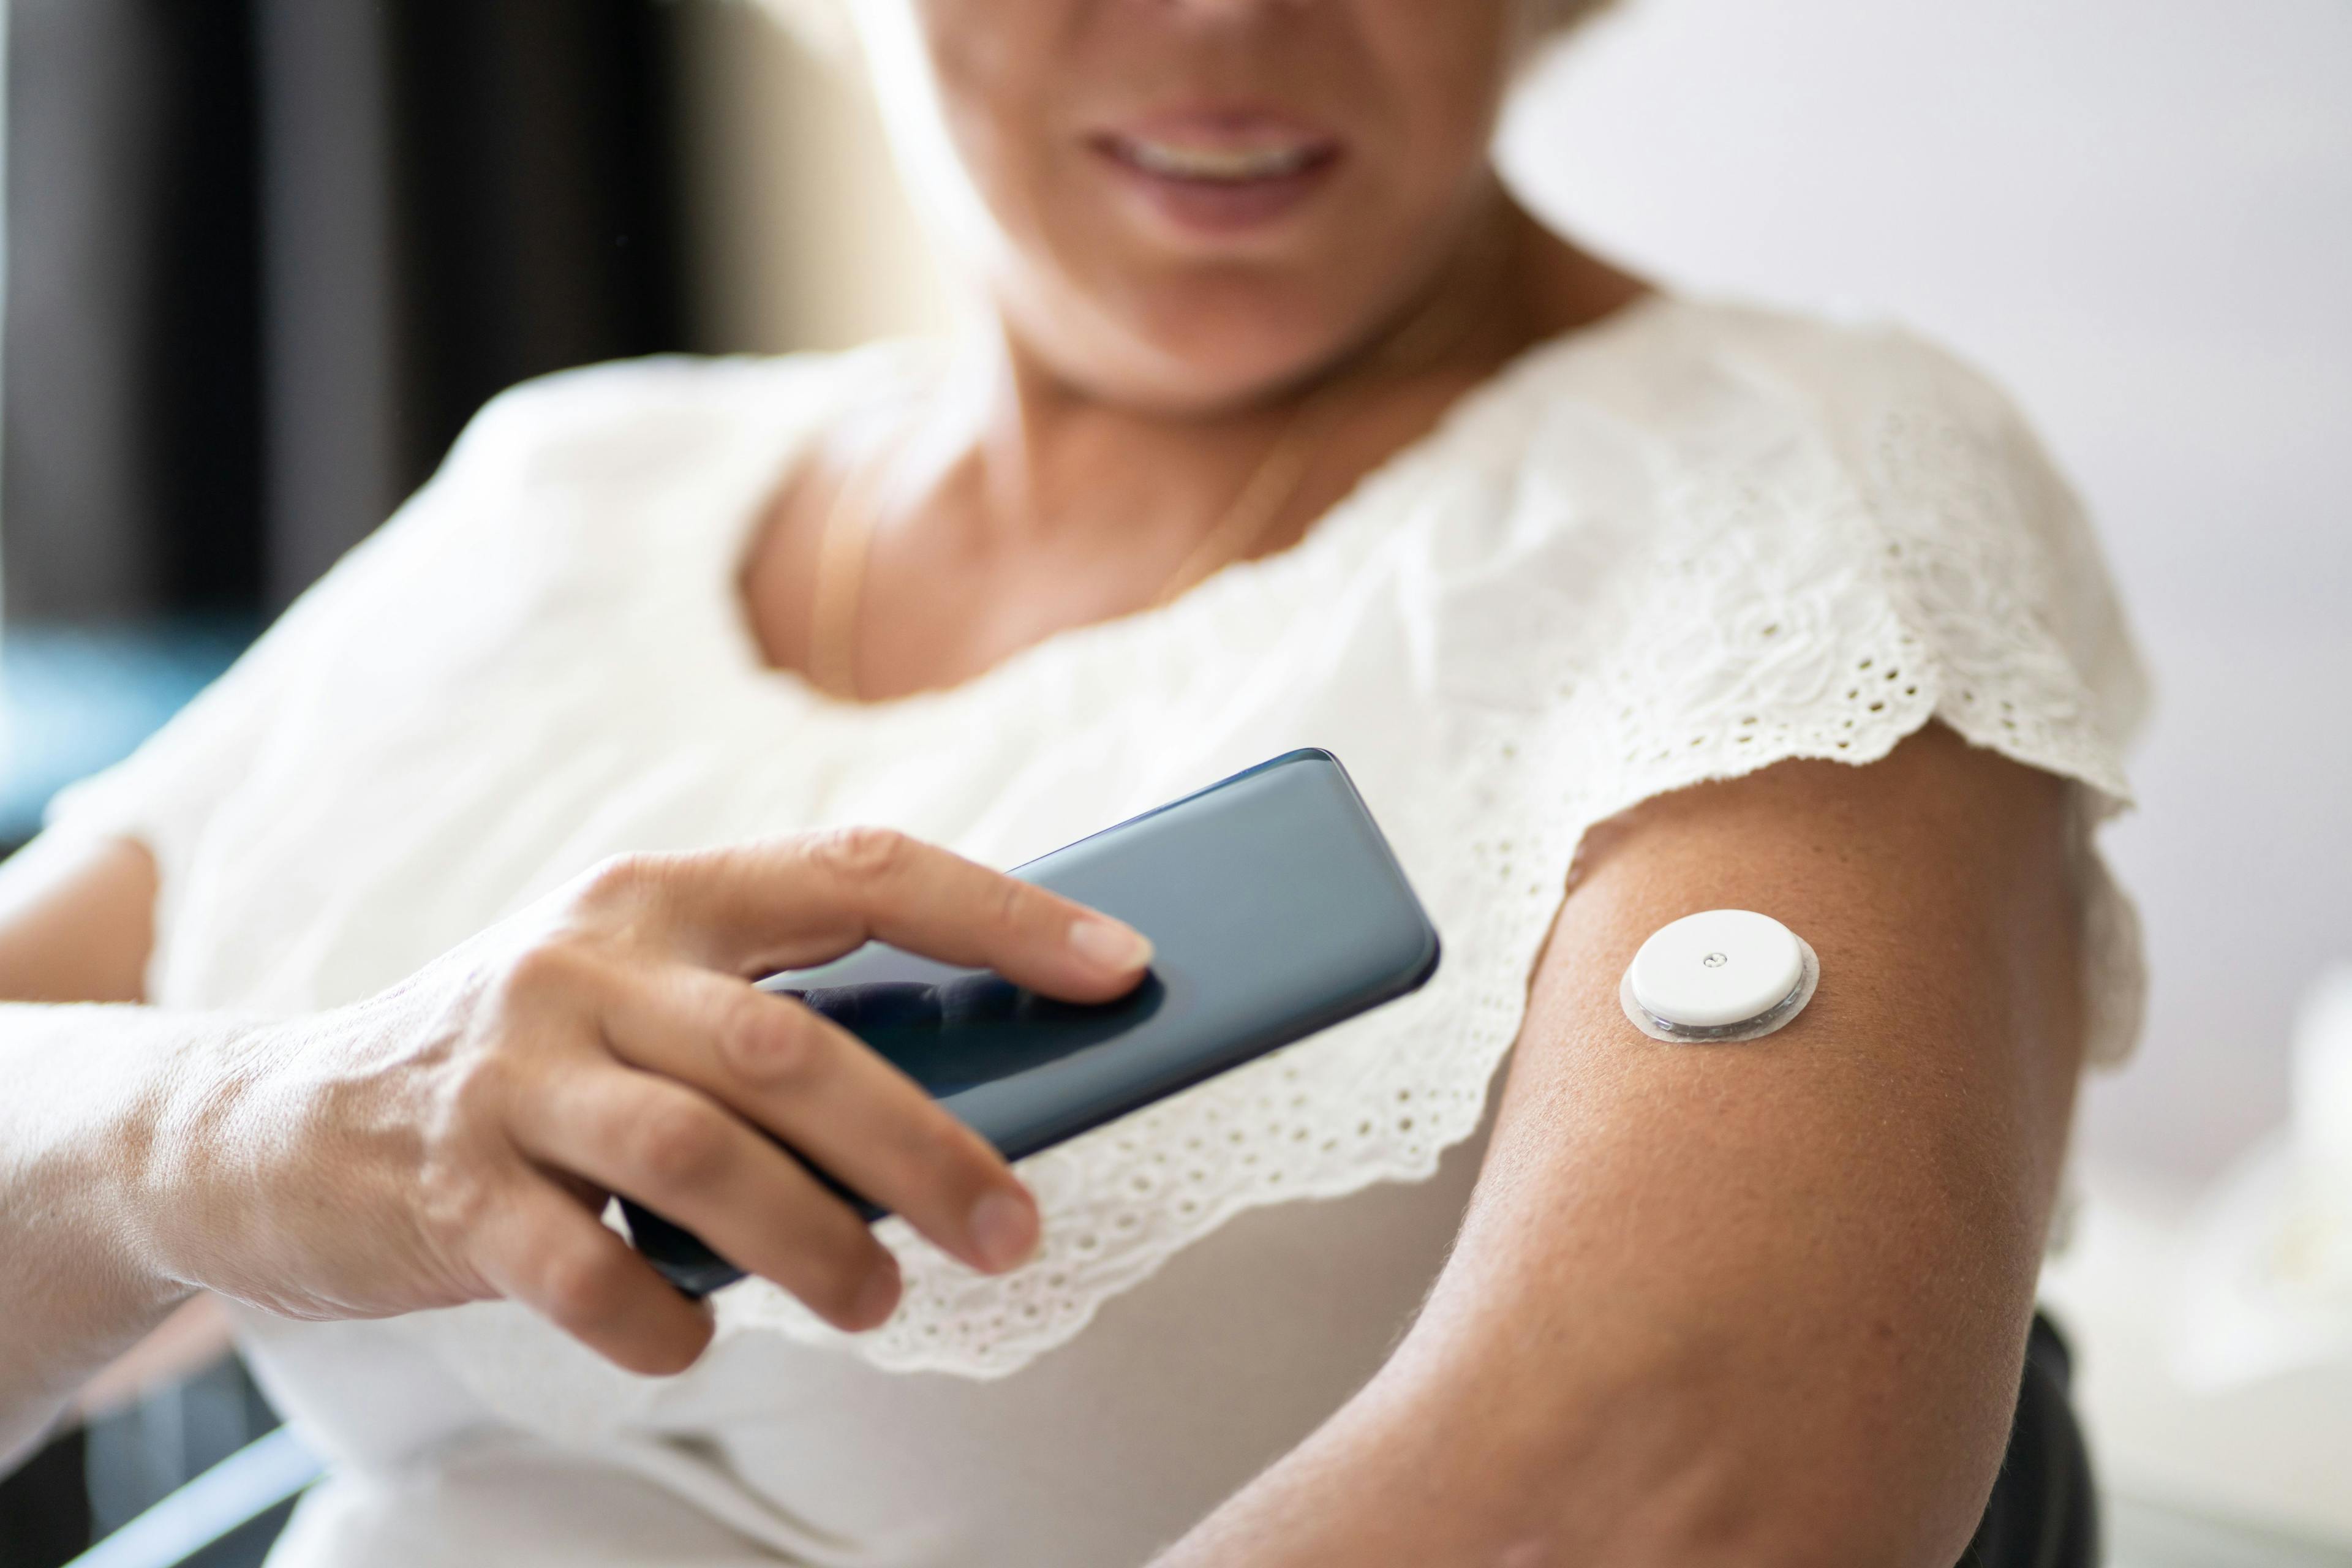 Woman testing glucose level with continuous glucose monitor / Andrey Popov - stock.adobe.com